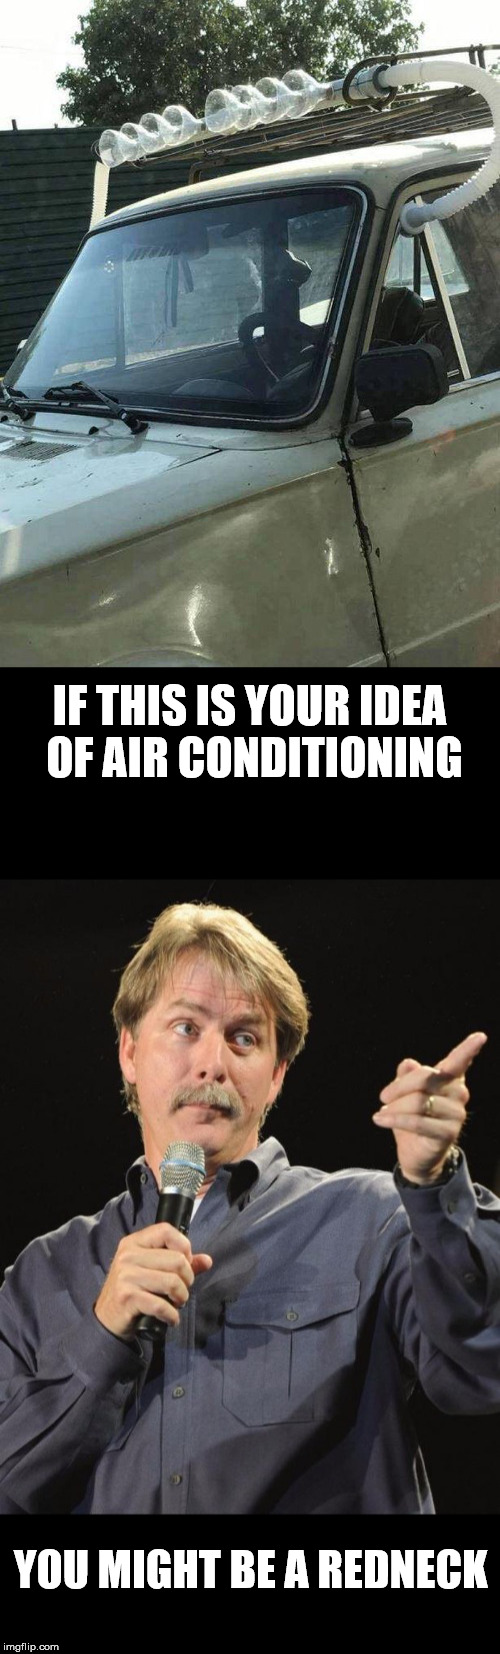 redneck tech: automotive air conditioning | IF THIS IS YOUR IDEA OF AIR CONDITIONING; YOU MIGHT BE A REDNECK | image tagged in redneck tech,air conditioning,jeff foxworthy | made w/ Imgflip meme maker